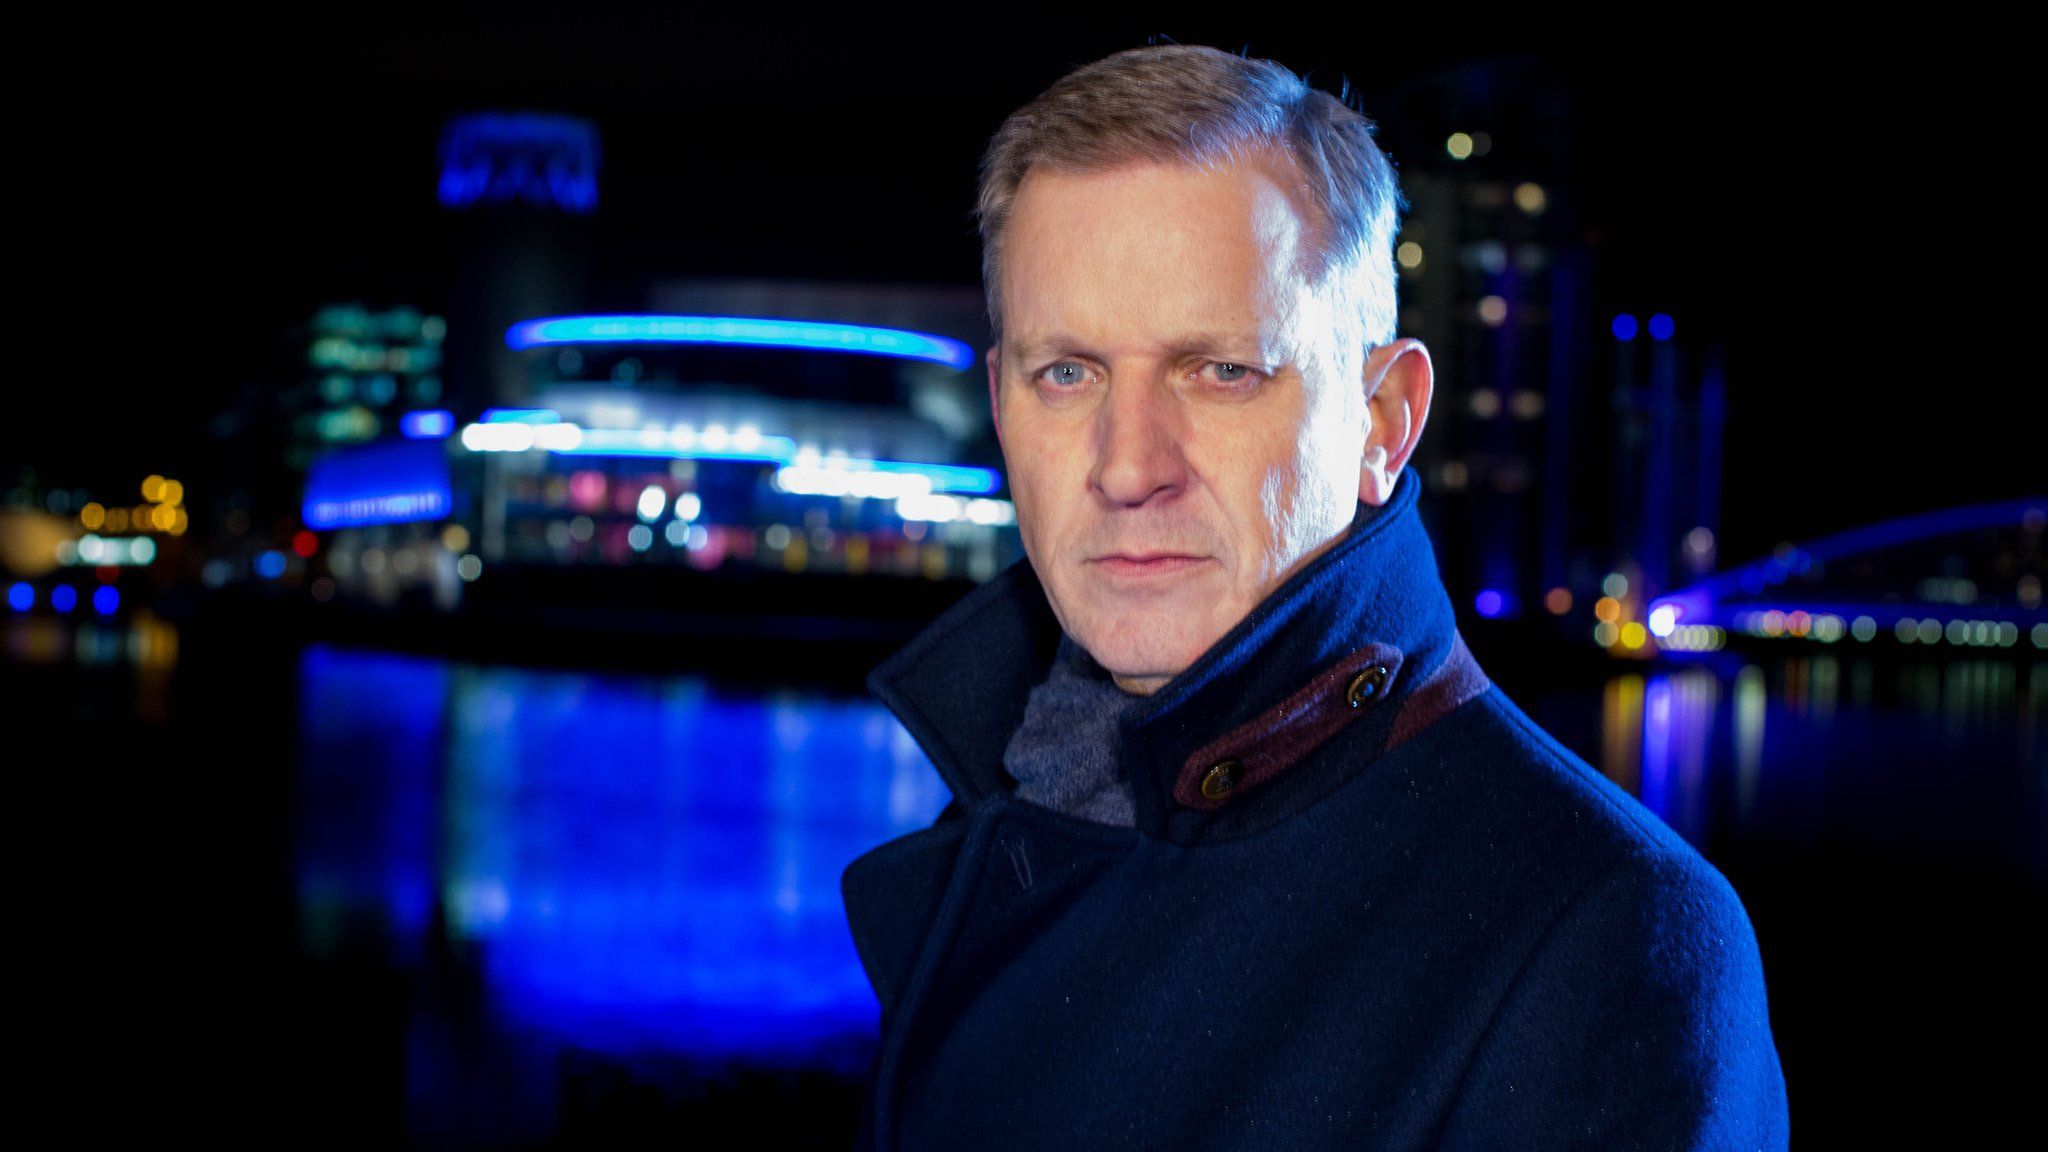 What Is Jeremy Kyle's Net Worth?